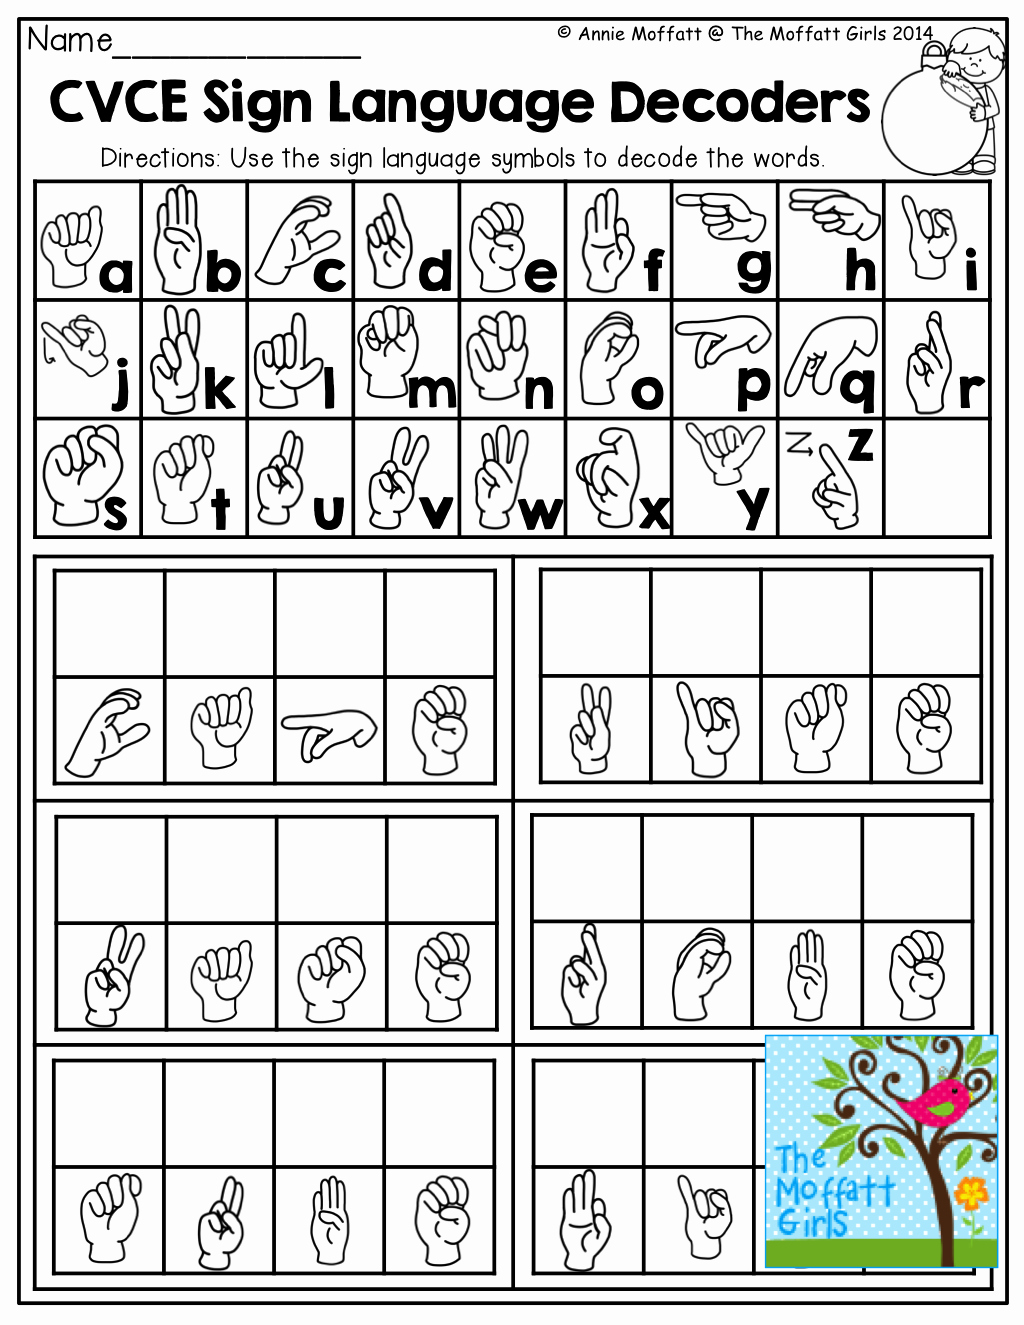 Sign Language Printable Worksheets Unique Cvce Sign Language Decoders and tons Of Other Fun and